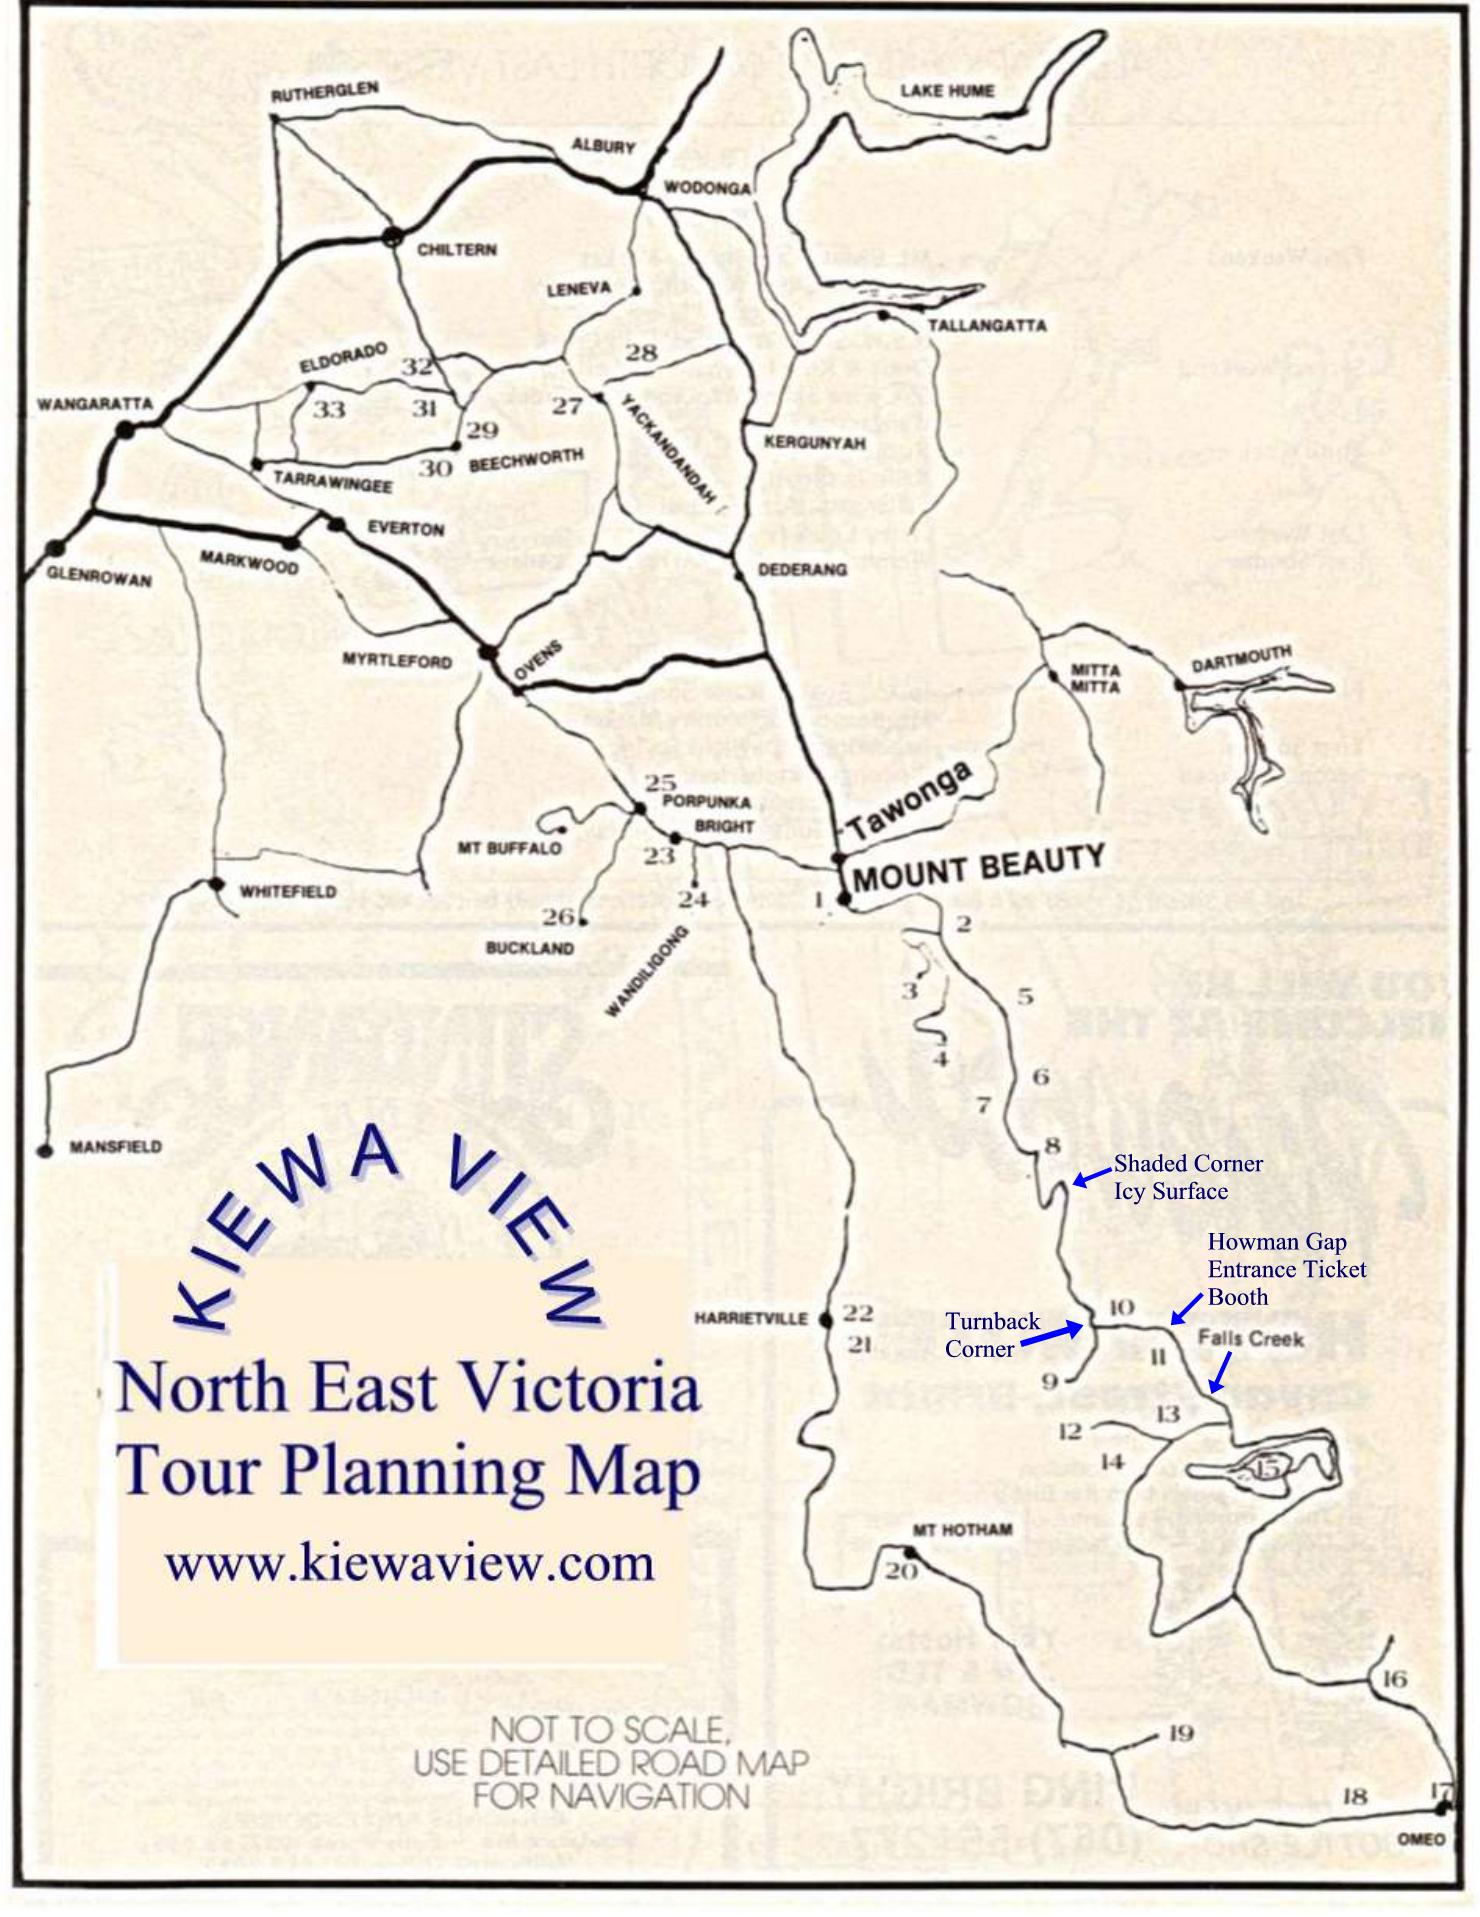 North East Victoria touring map including road to Falls Creek